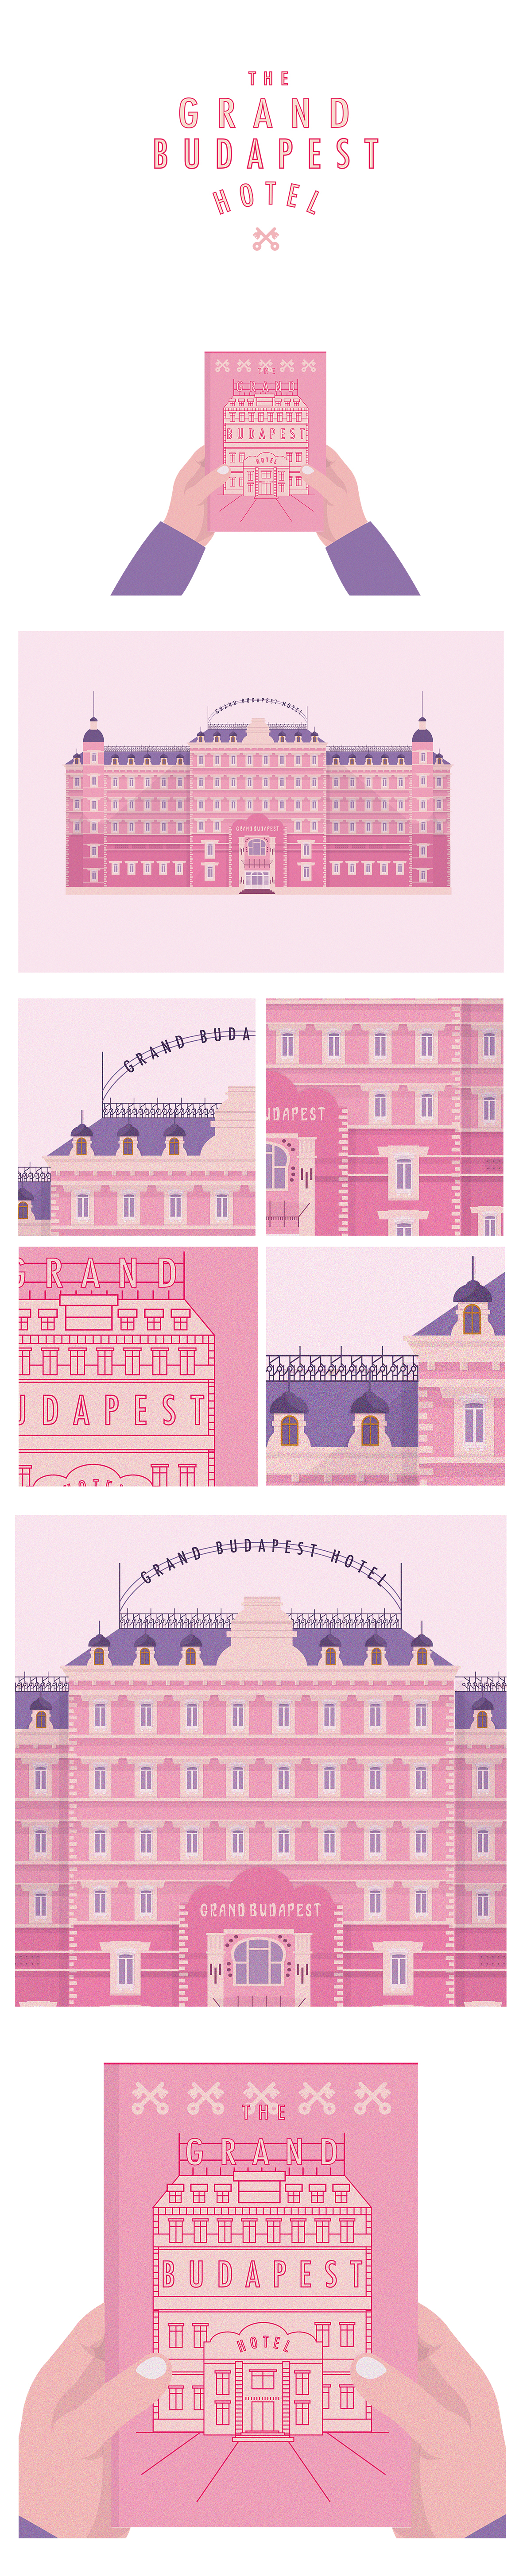 grand budapest hotel wes anderson flat desing ping mendl's hotel salomé gautier draw Illustrator